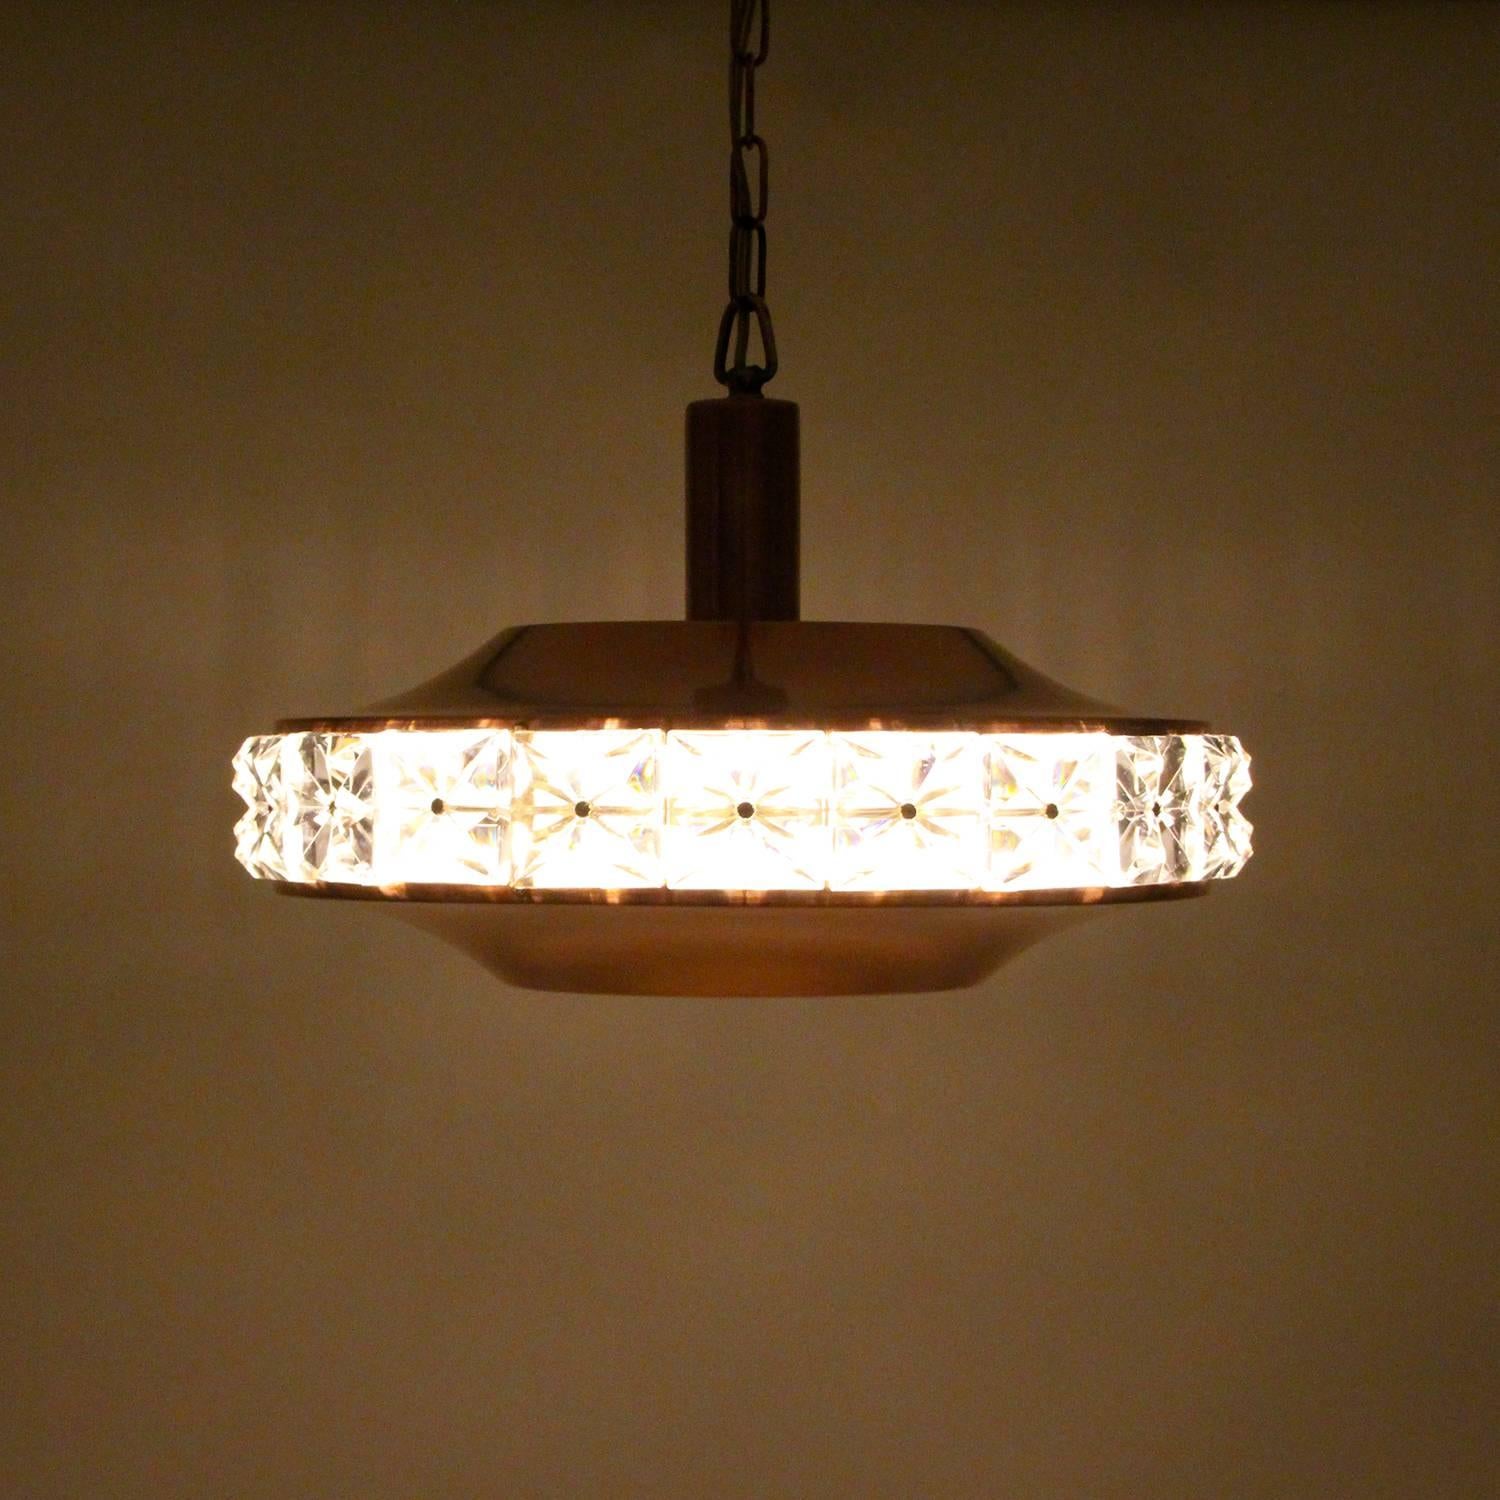 Hollywood Regency Copper and Crystal Pendant by Vitrika, 1960s, Danish Modern Copper Ceiling Light